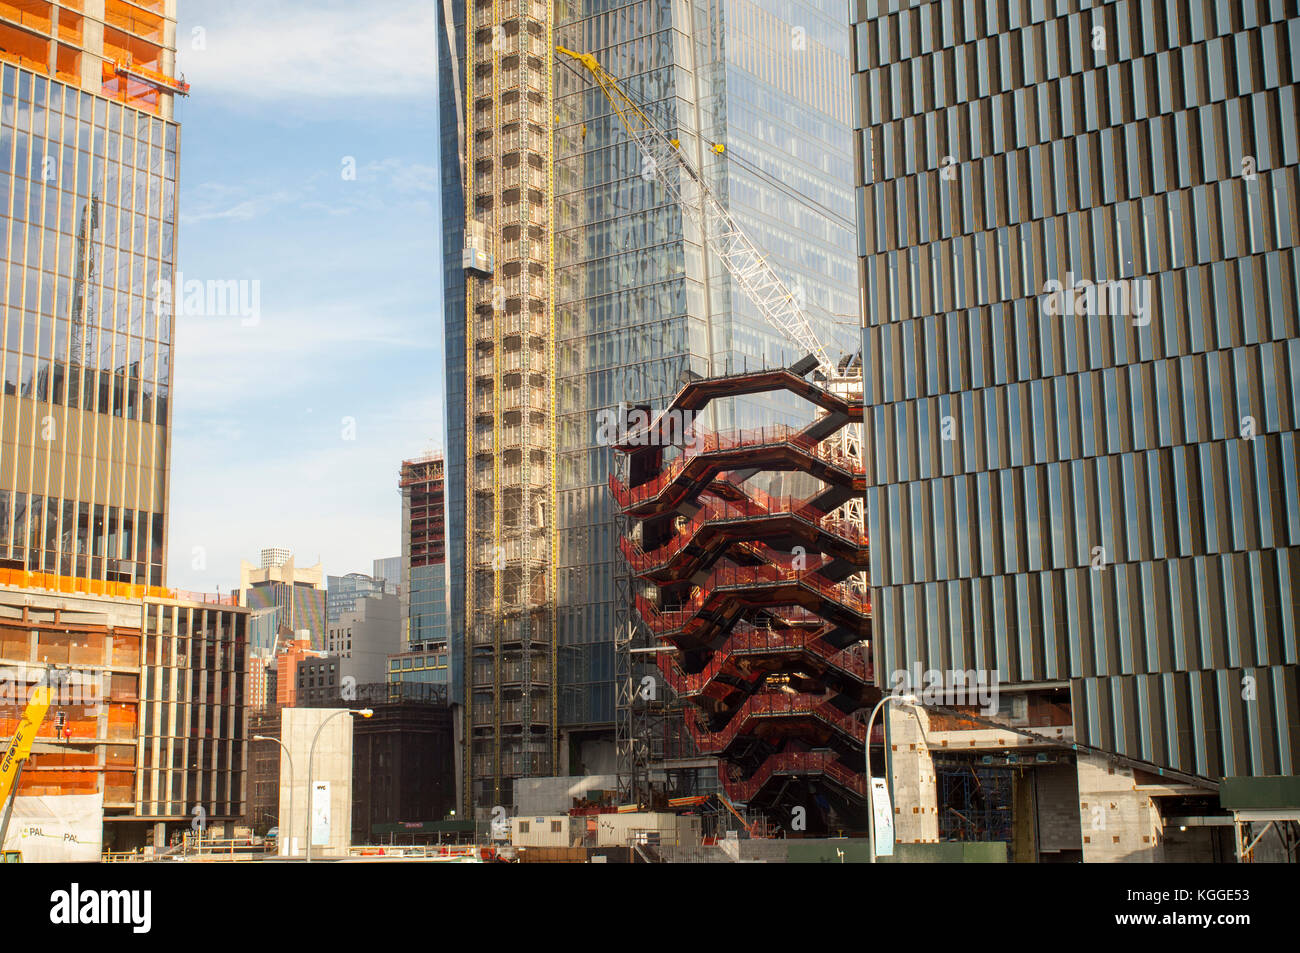 Development in and around Hudson Yards, including "The Vessel" centerpiece, in New York on Saturday, November 4, 2017. (© Richard B. Levine) Stock Photo